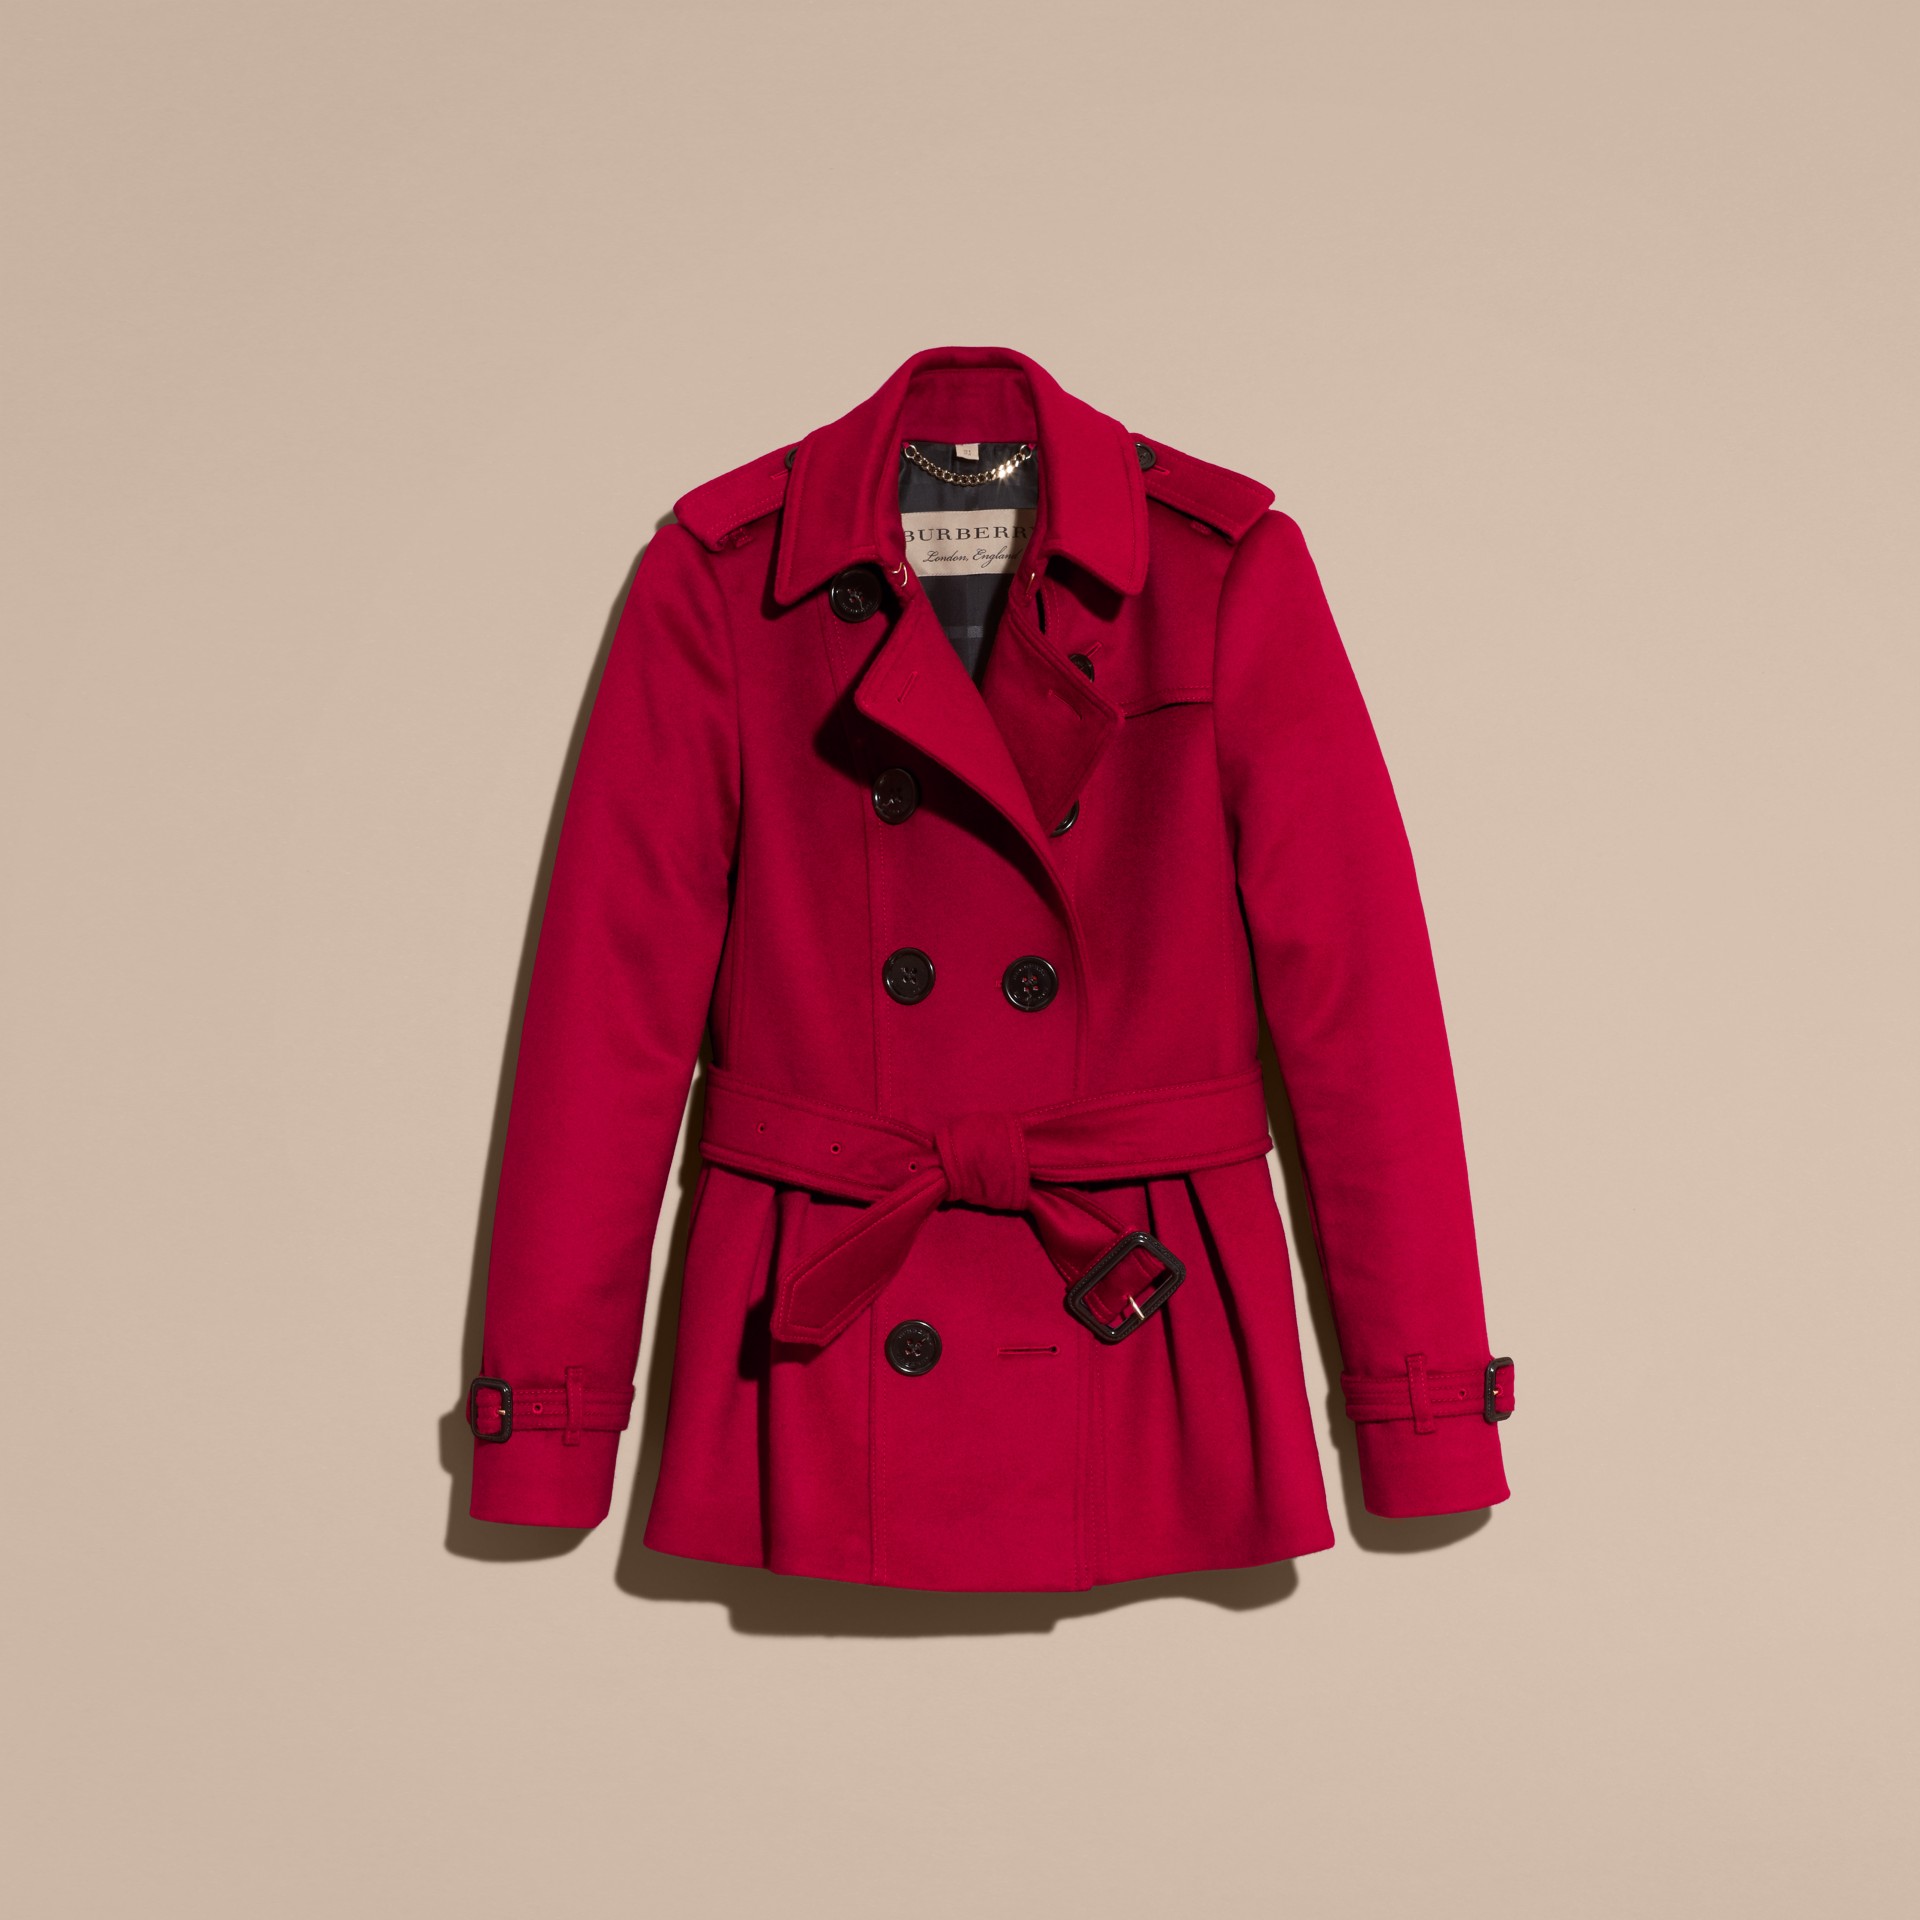 Wool Cashmere Trench Jacket in Parade Red - Women | Burberry United States